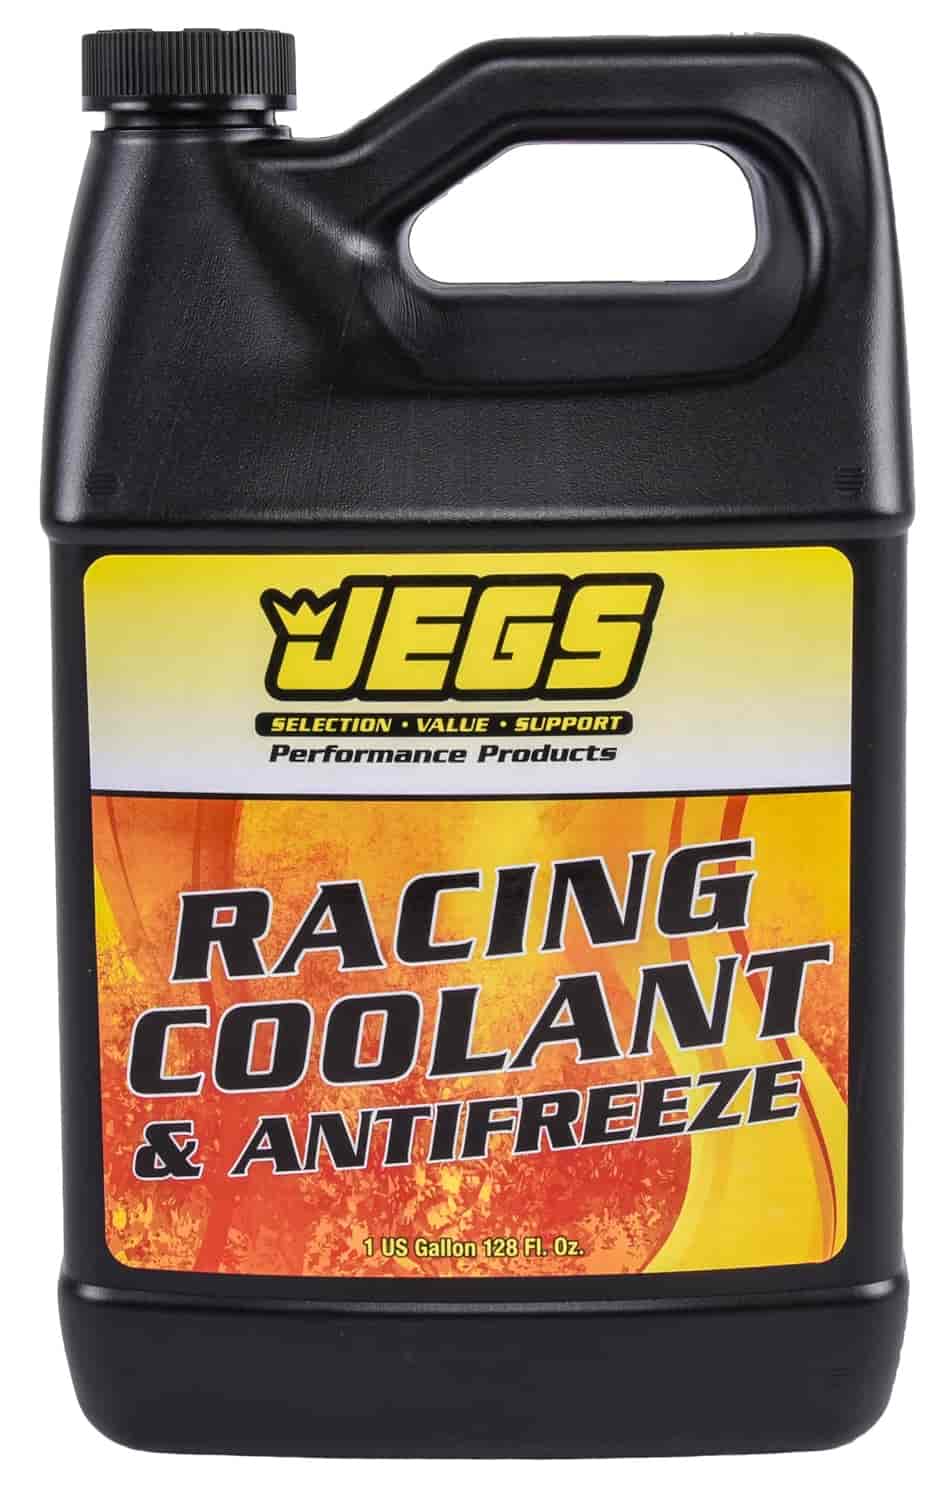 Racing Coolant and Antifreeze with LP-3 [1 Gallon]